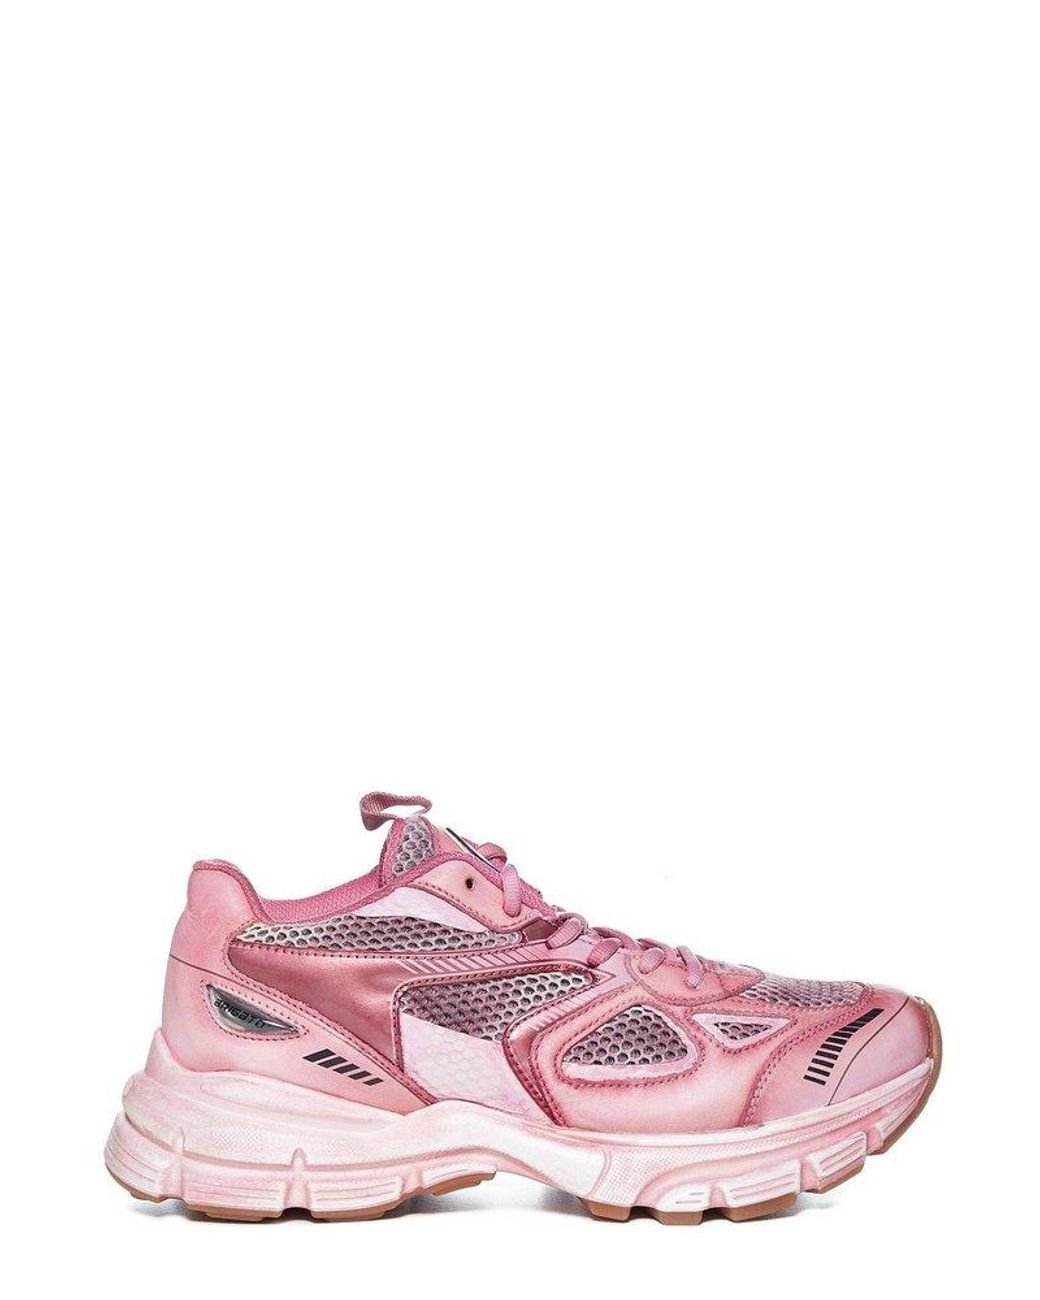 Axel Arigato Marathon Dip-dye Lace-up Sneakers in Pink | Lyst